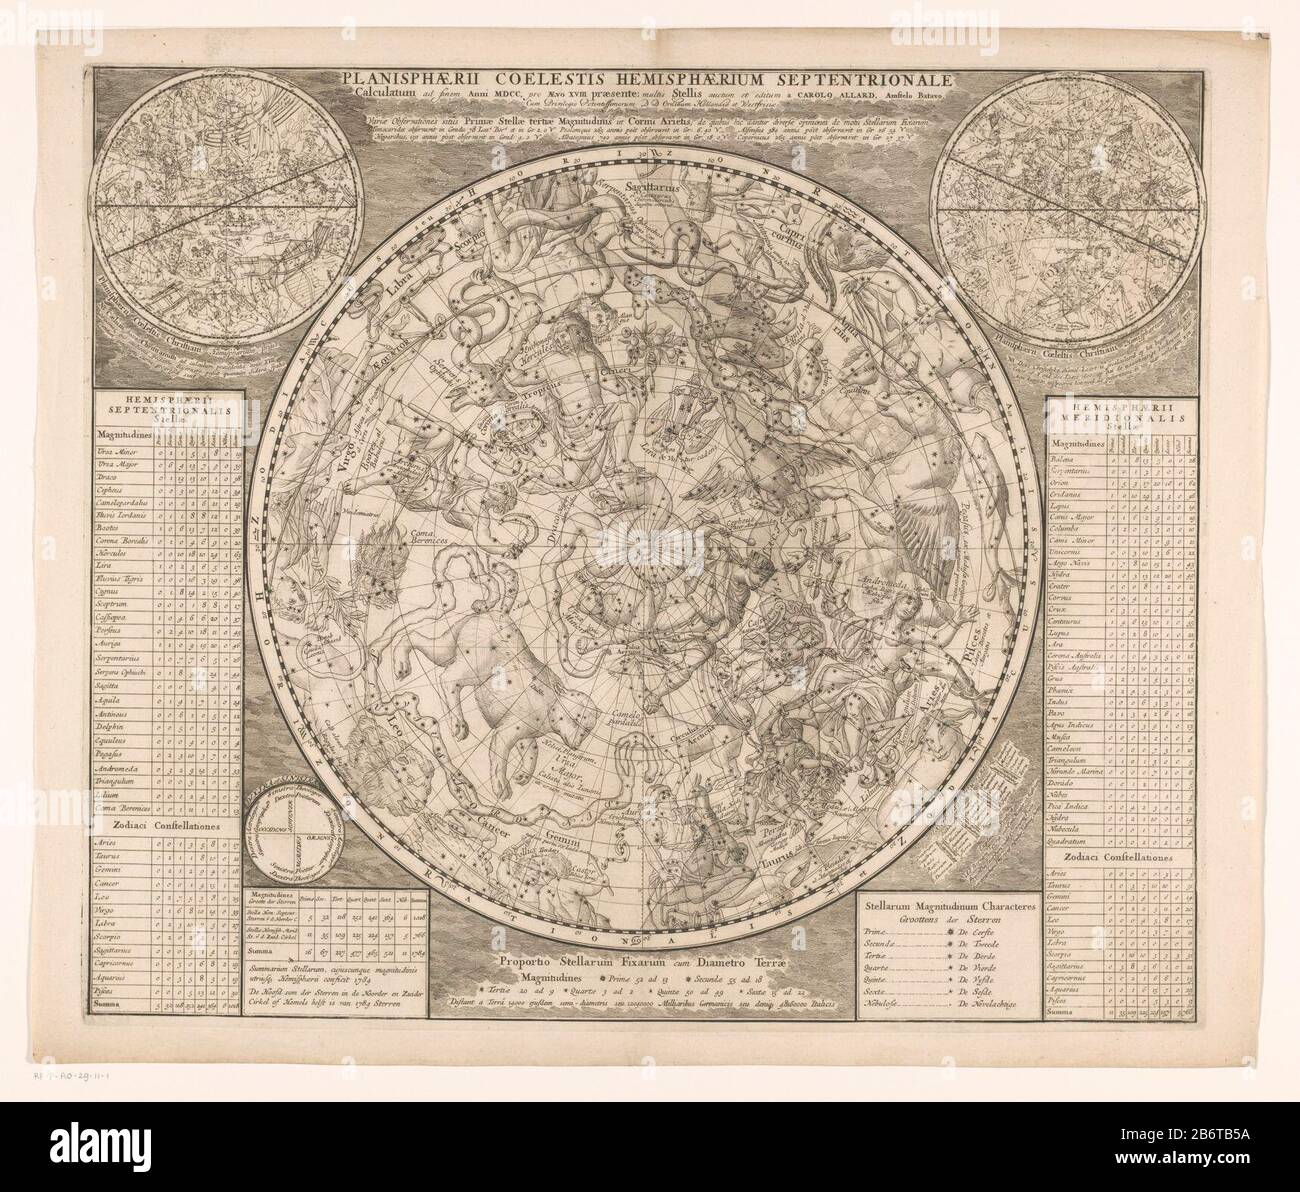 Hemelkaart met de noordelijke sterrenbeelden Planisphaerii coelestis hemisphaerium septentrionale () (titel op object) Celestial Map with the northern constellations, according to the traditional classification of Ptolemy and his followers. Left- and right sky maps of the constellations Christian Julius Schiller. Left and right of the card tables with an overview of the number of stars per constellation. Below, in the middle, and bottom, right of center, a legenda. Manufacturer : printmaker: anonymous publisher: Carel Allard (listed property) provider of privilege: States of Holland and West F Stock Photo